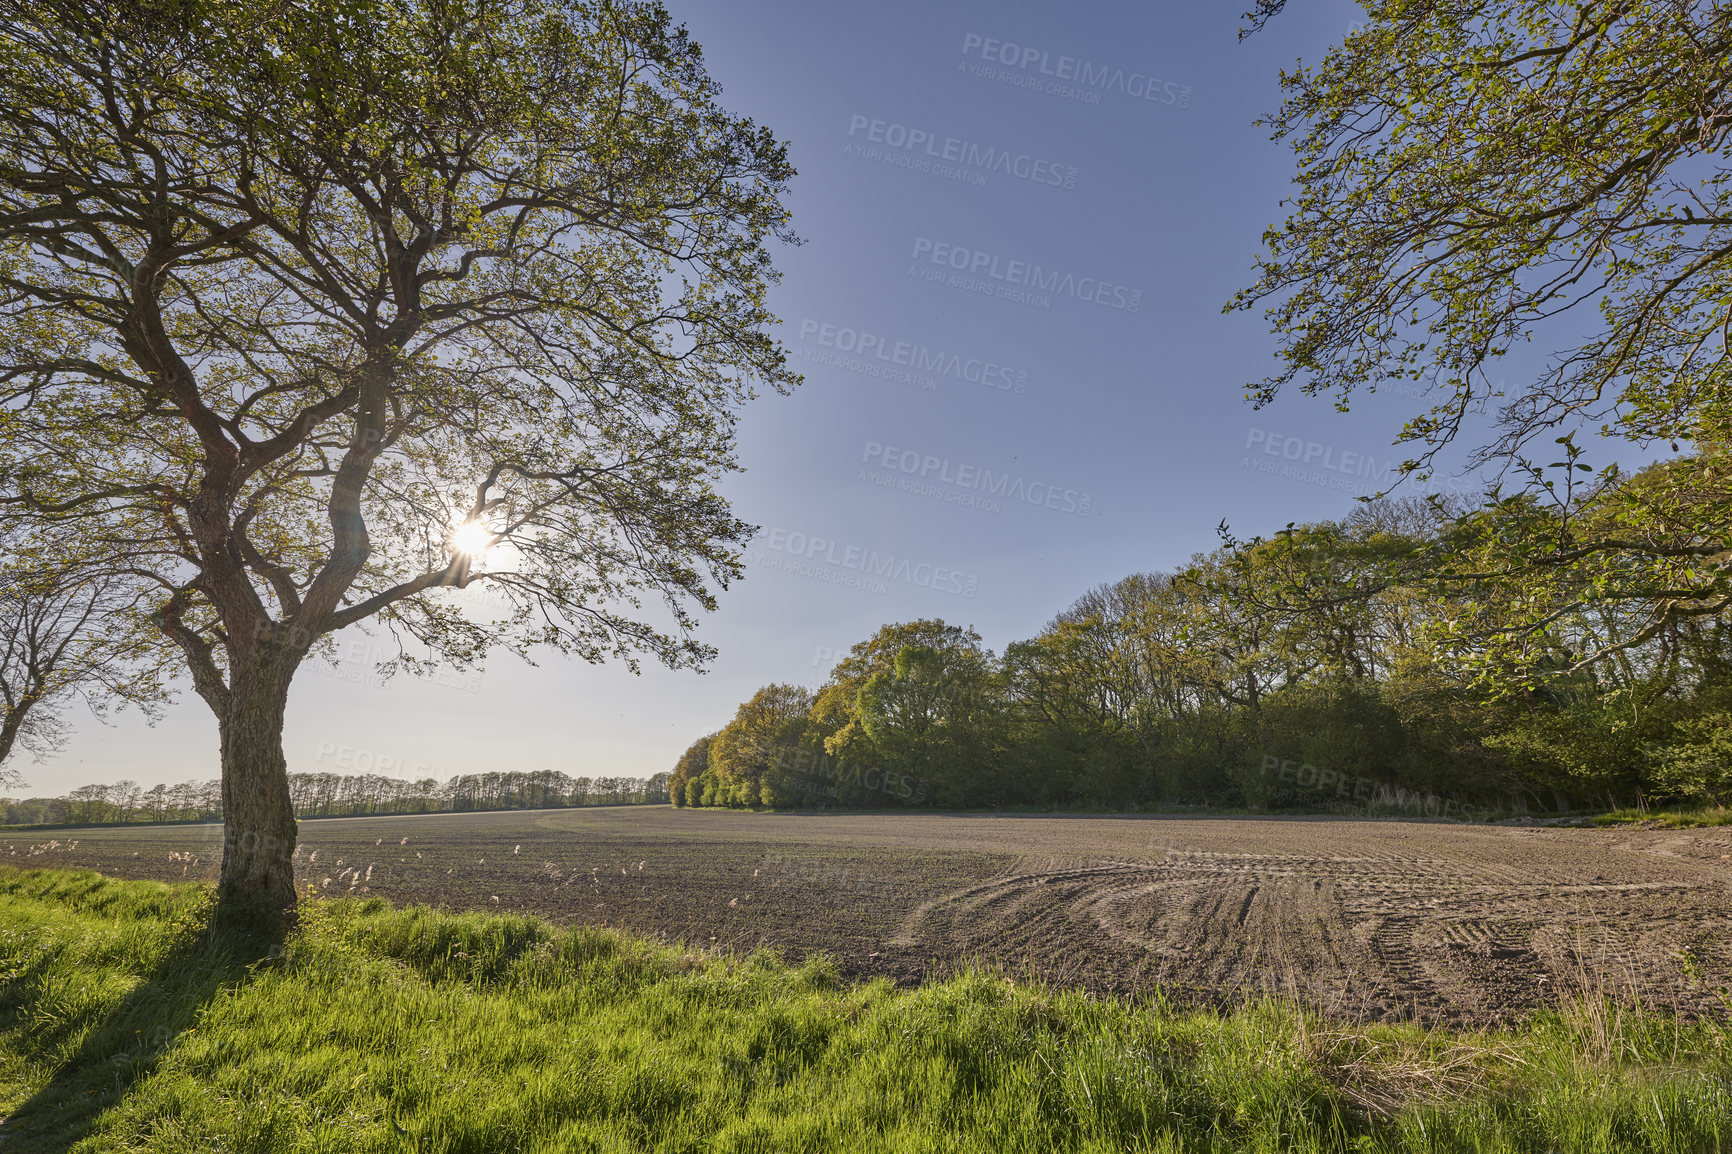 Buy stock photo Landscape of a sustainable farm or meadow with tall trees and a clear blue sky with copyspace. Organic agricultural field with green grass and soil ready for planting during autumn